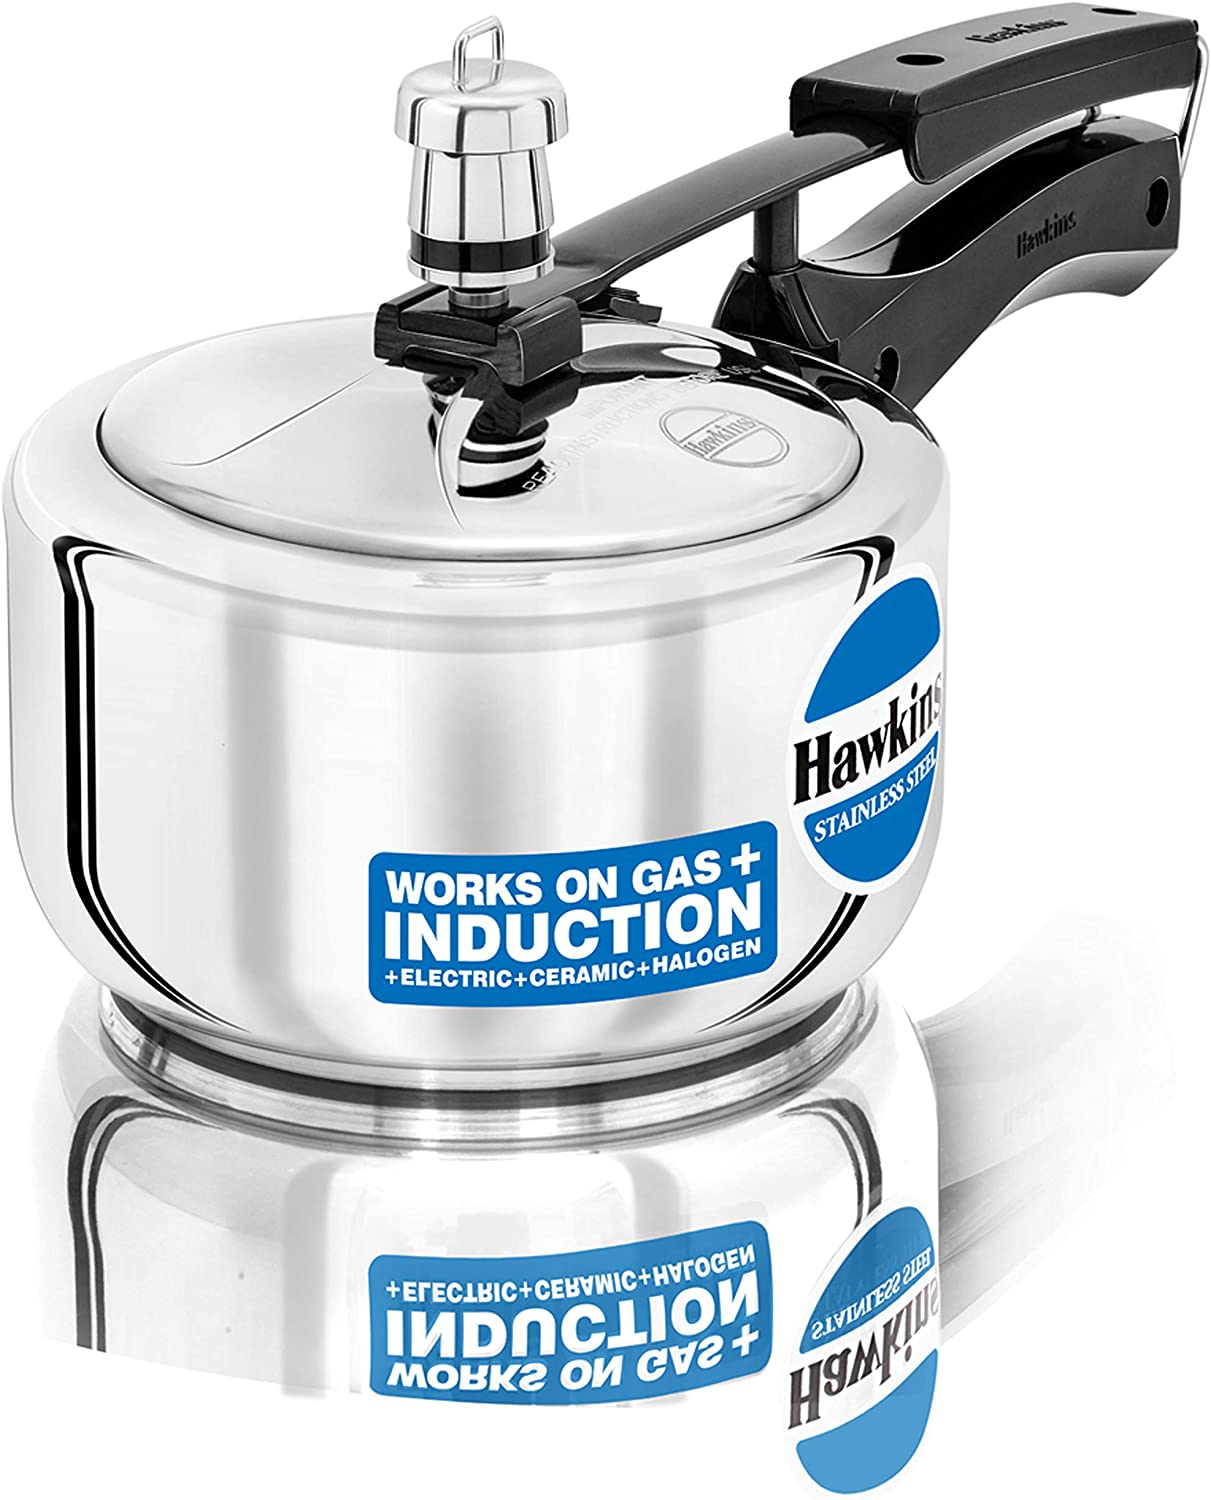 Hawkins 4 Litre Stainless Steel Pressure Cooker (Gas + Induction + Electric)